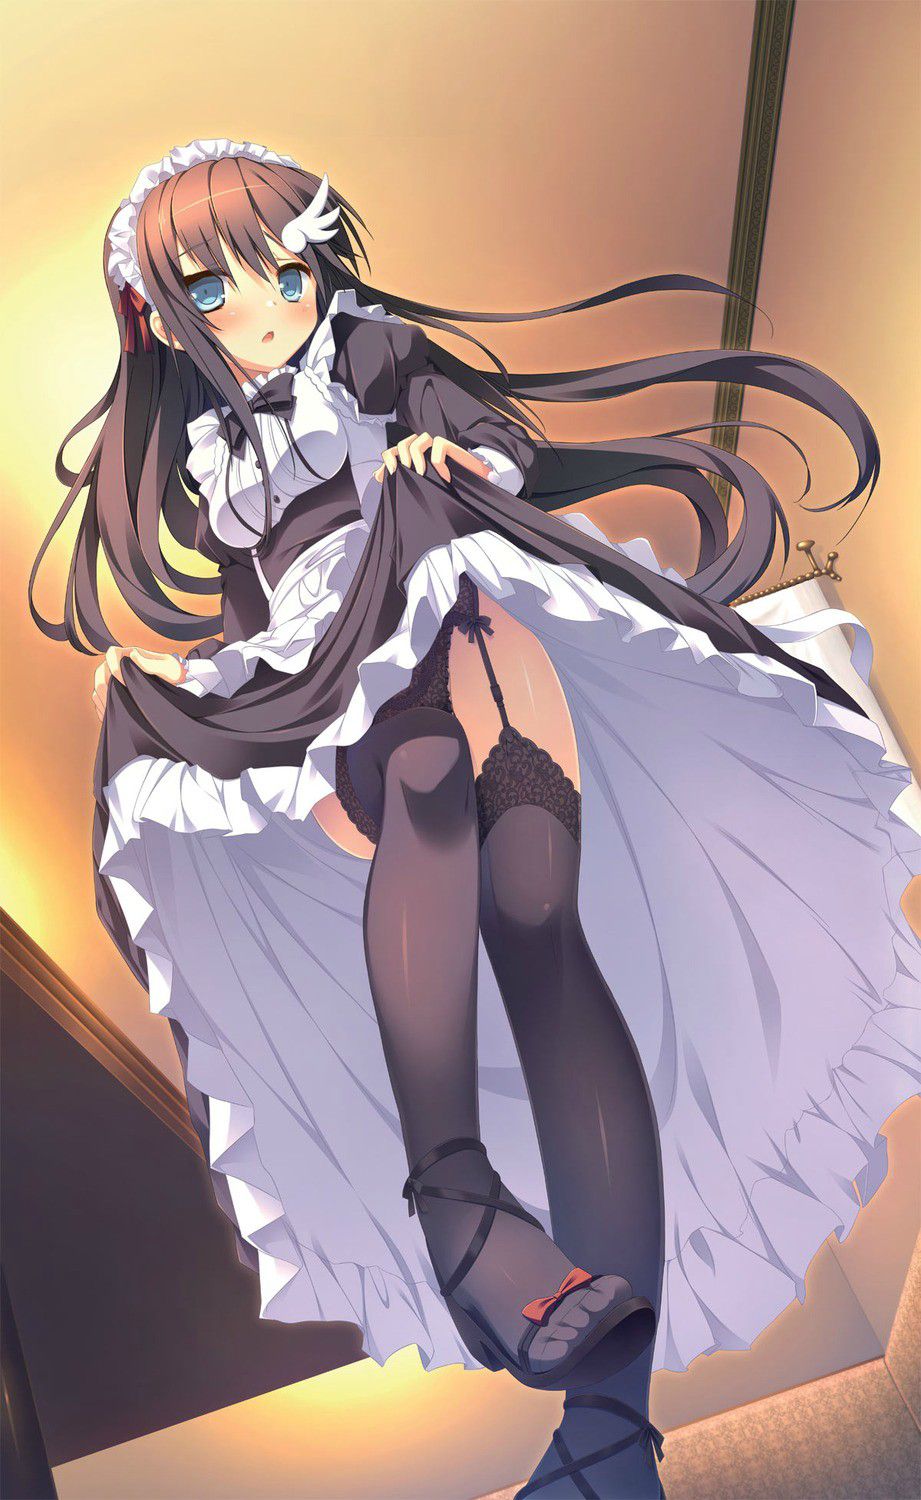 Why do girls in maid clothes look so sexual? 2